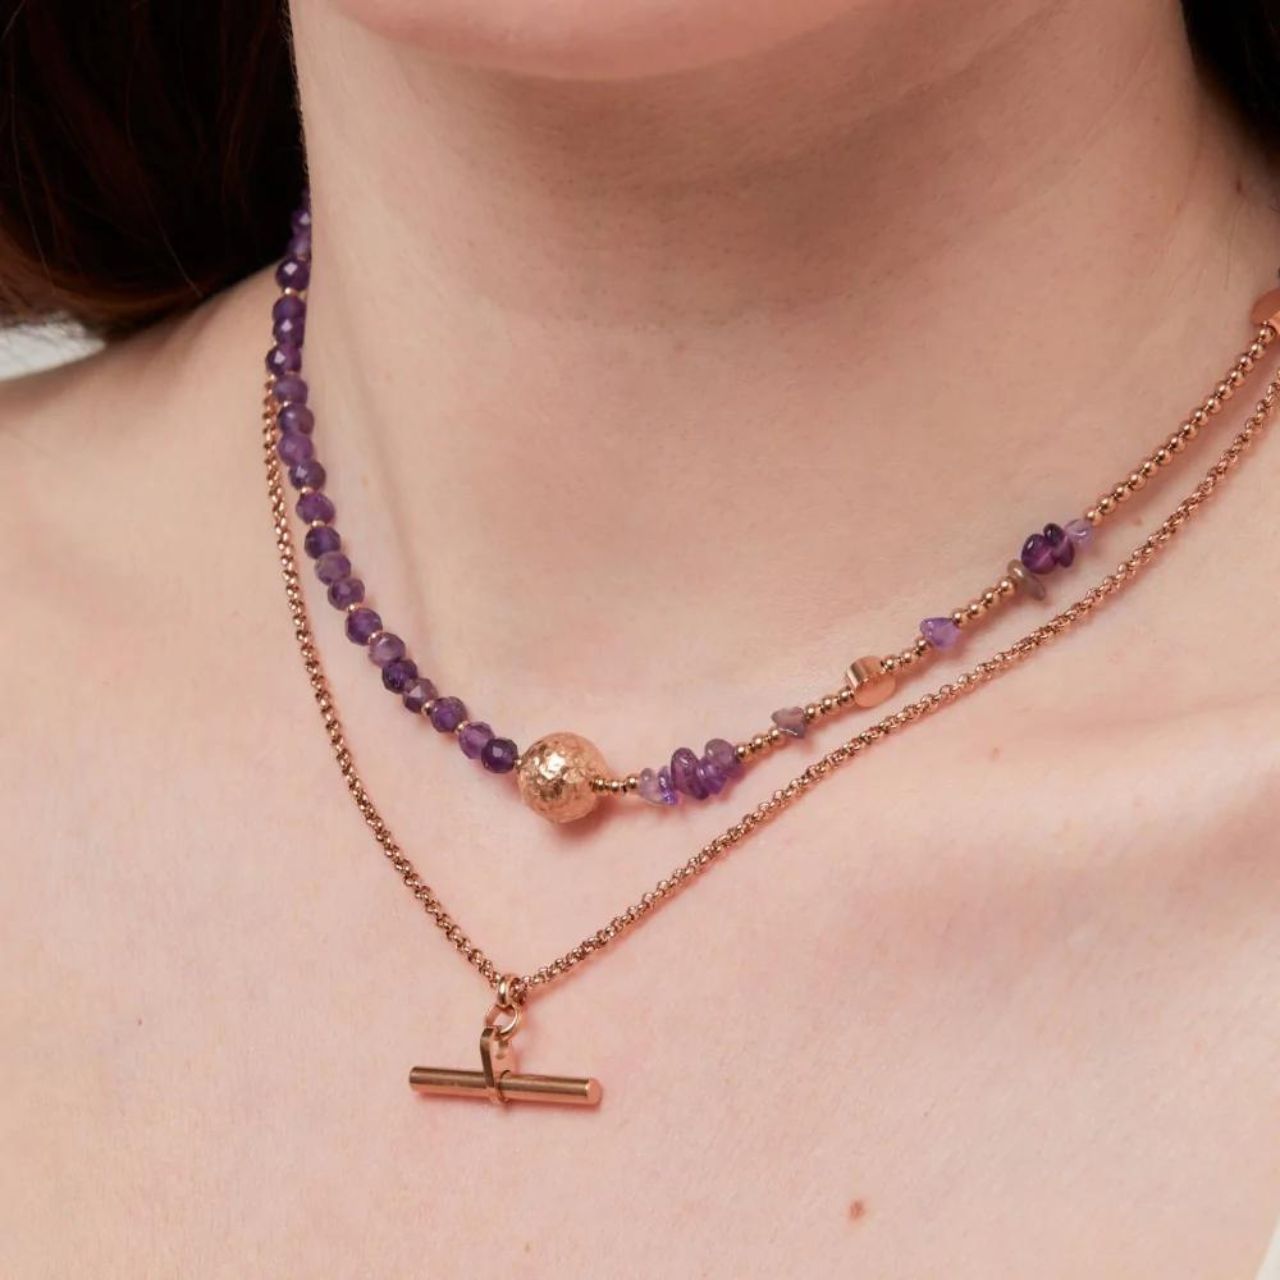 Eva Amethyst Necklace by Knight & Day  Beautiful necklace with variety of amethyst semi precious stones and rose gold beads. Lobster claw fastening. Rose gold plating.